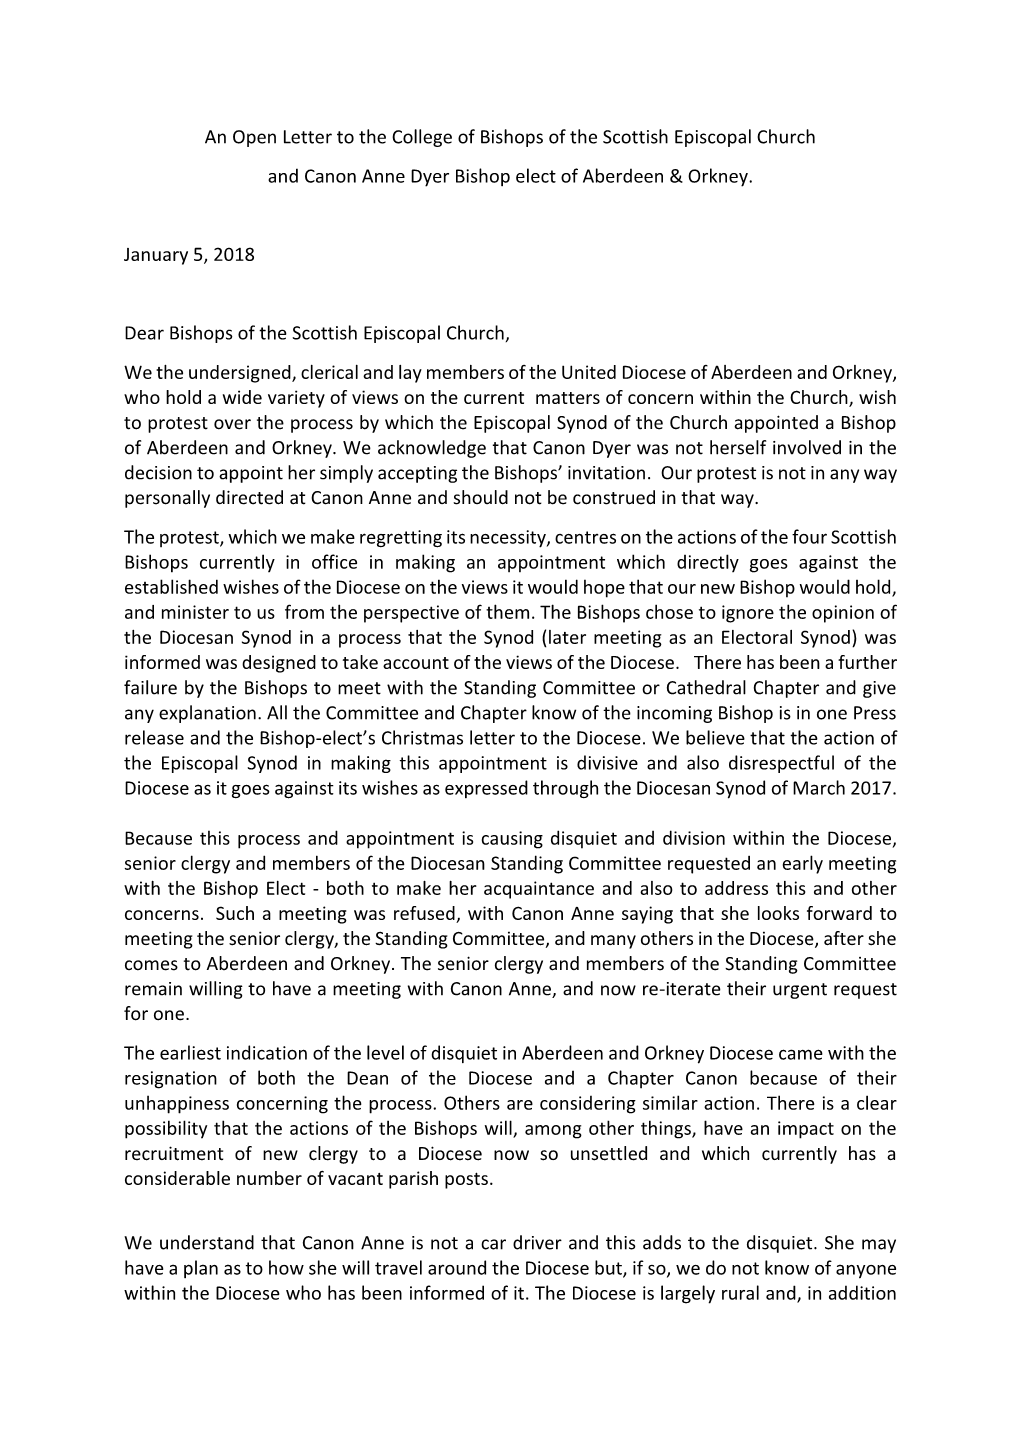 An Open Letter to the College of Bishops of the Scottish Episcopal Church and Canon Anne Dyer Bishop Elect of Aberdeen &